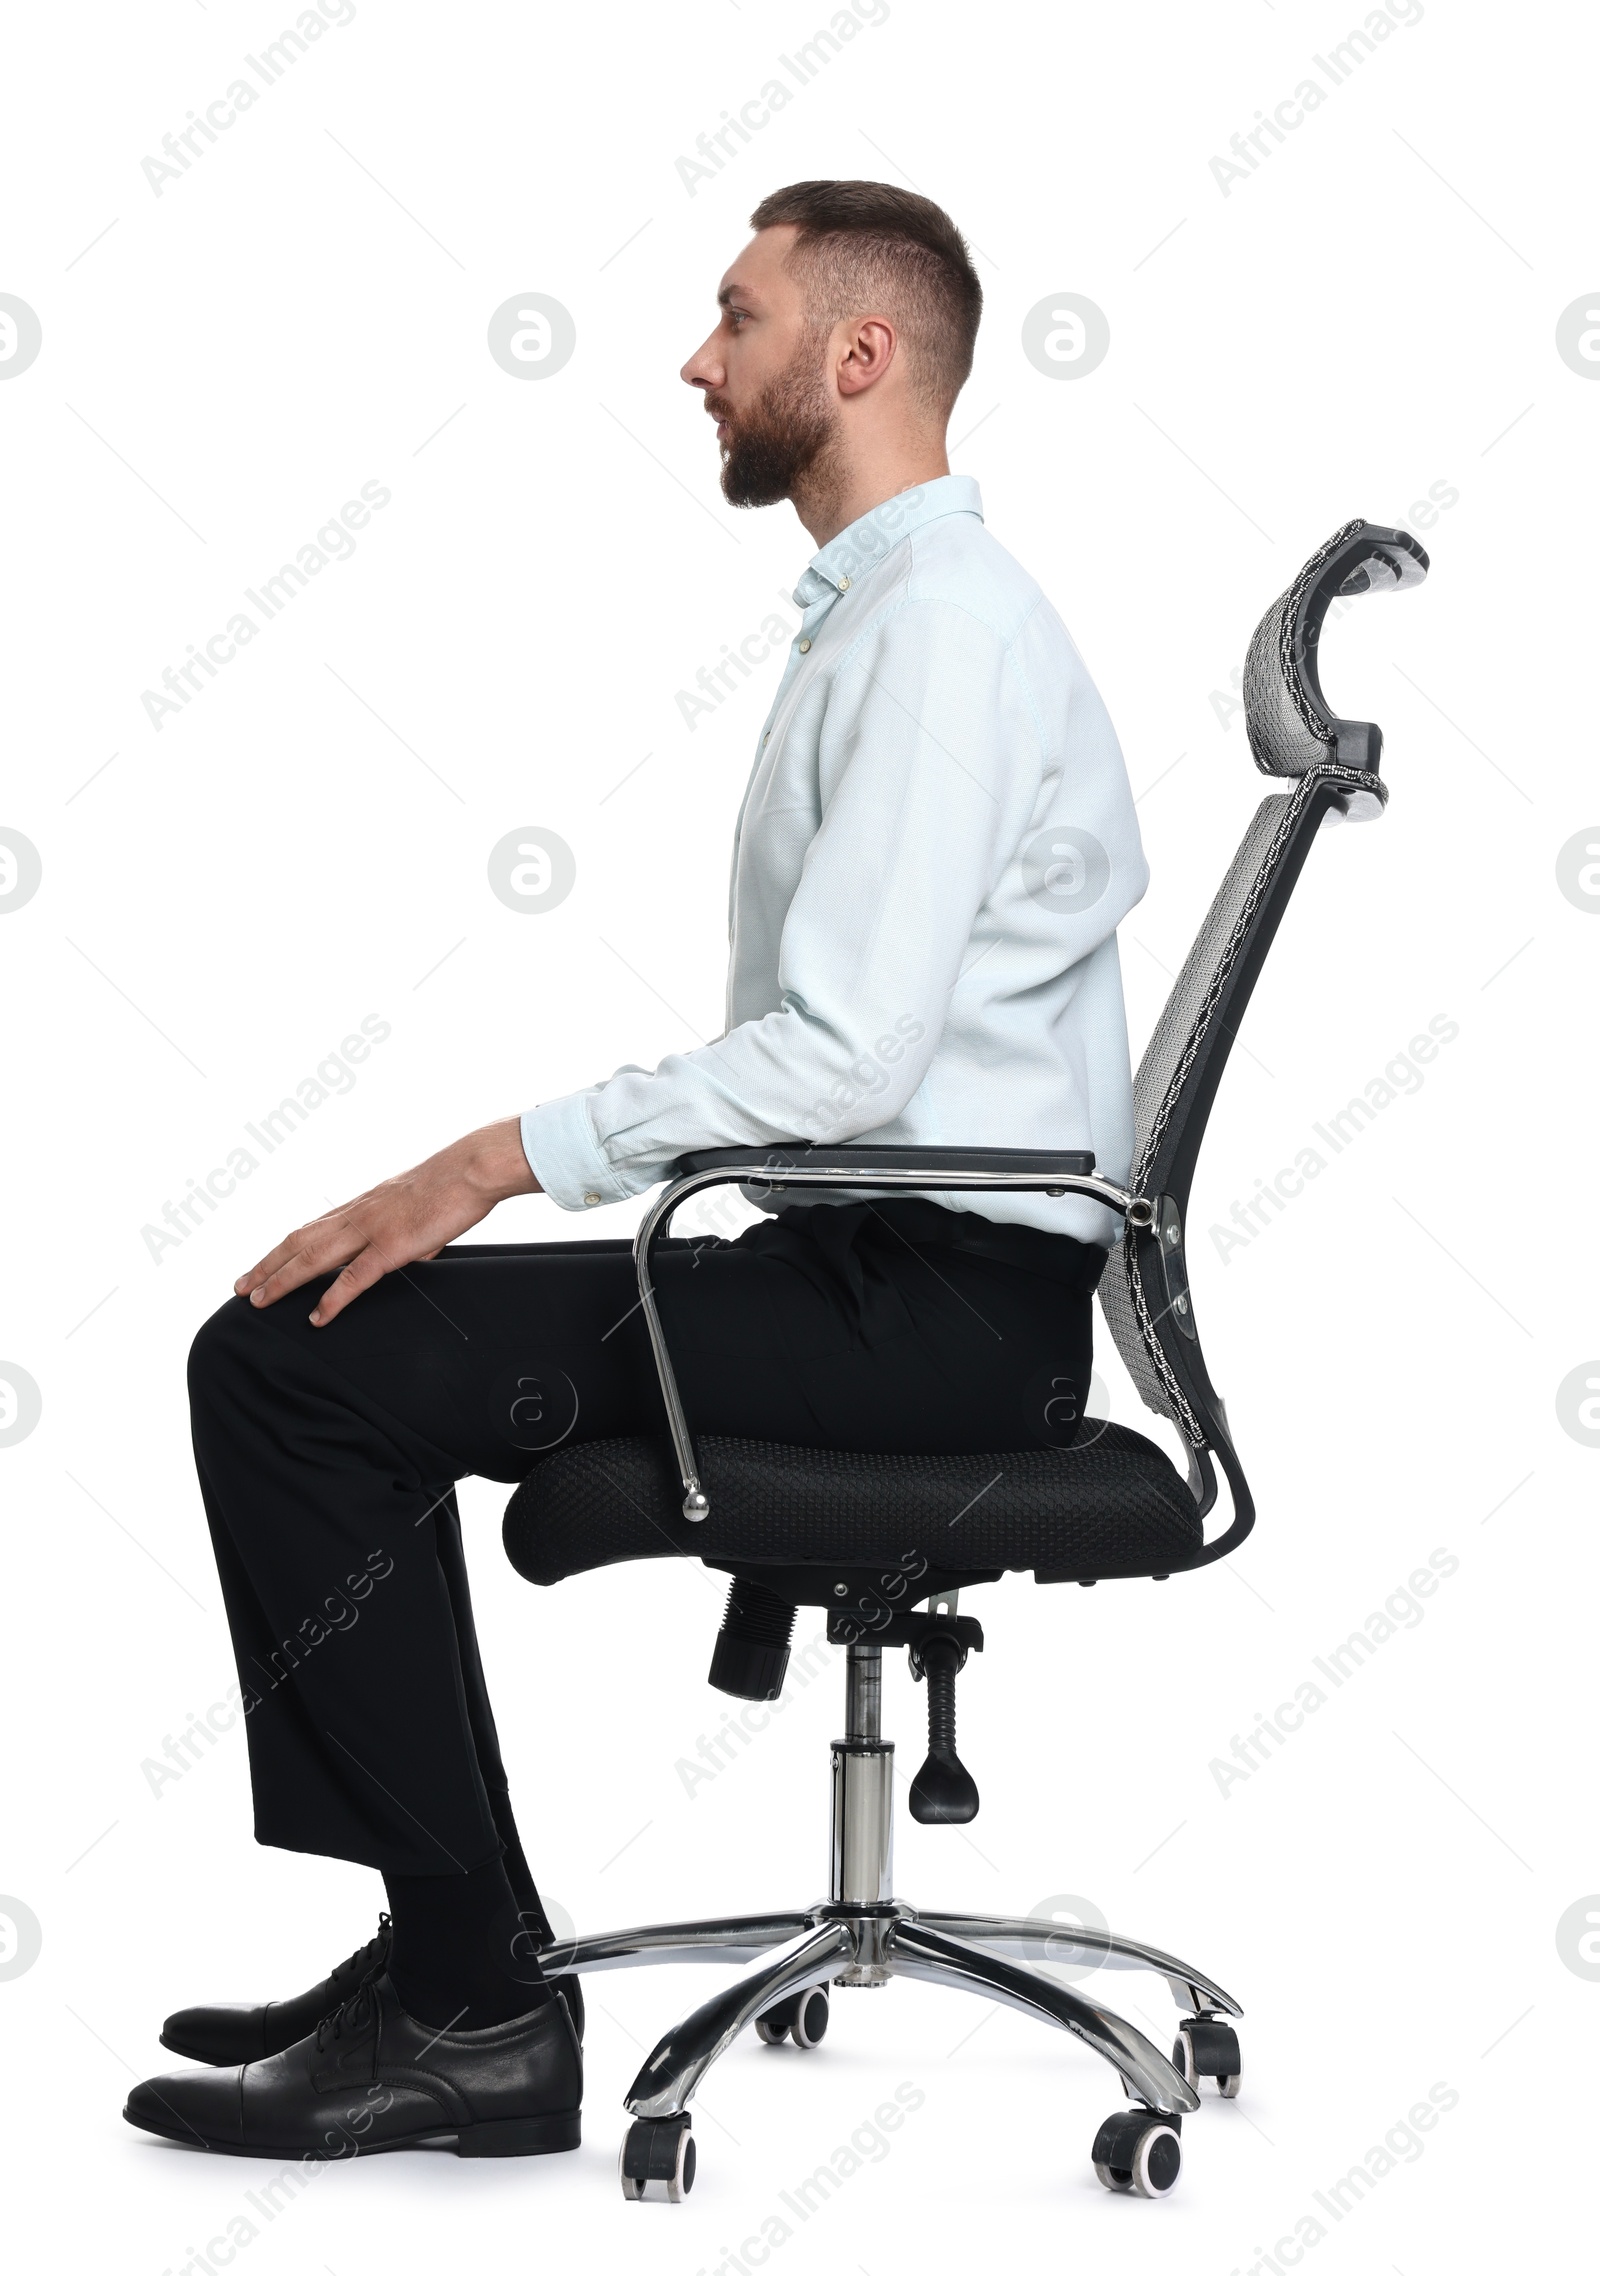 Photo of Man with good posture sitting on chair against white background